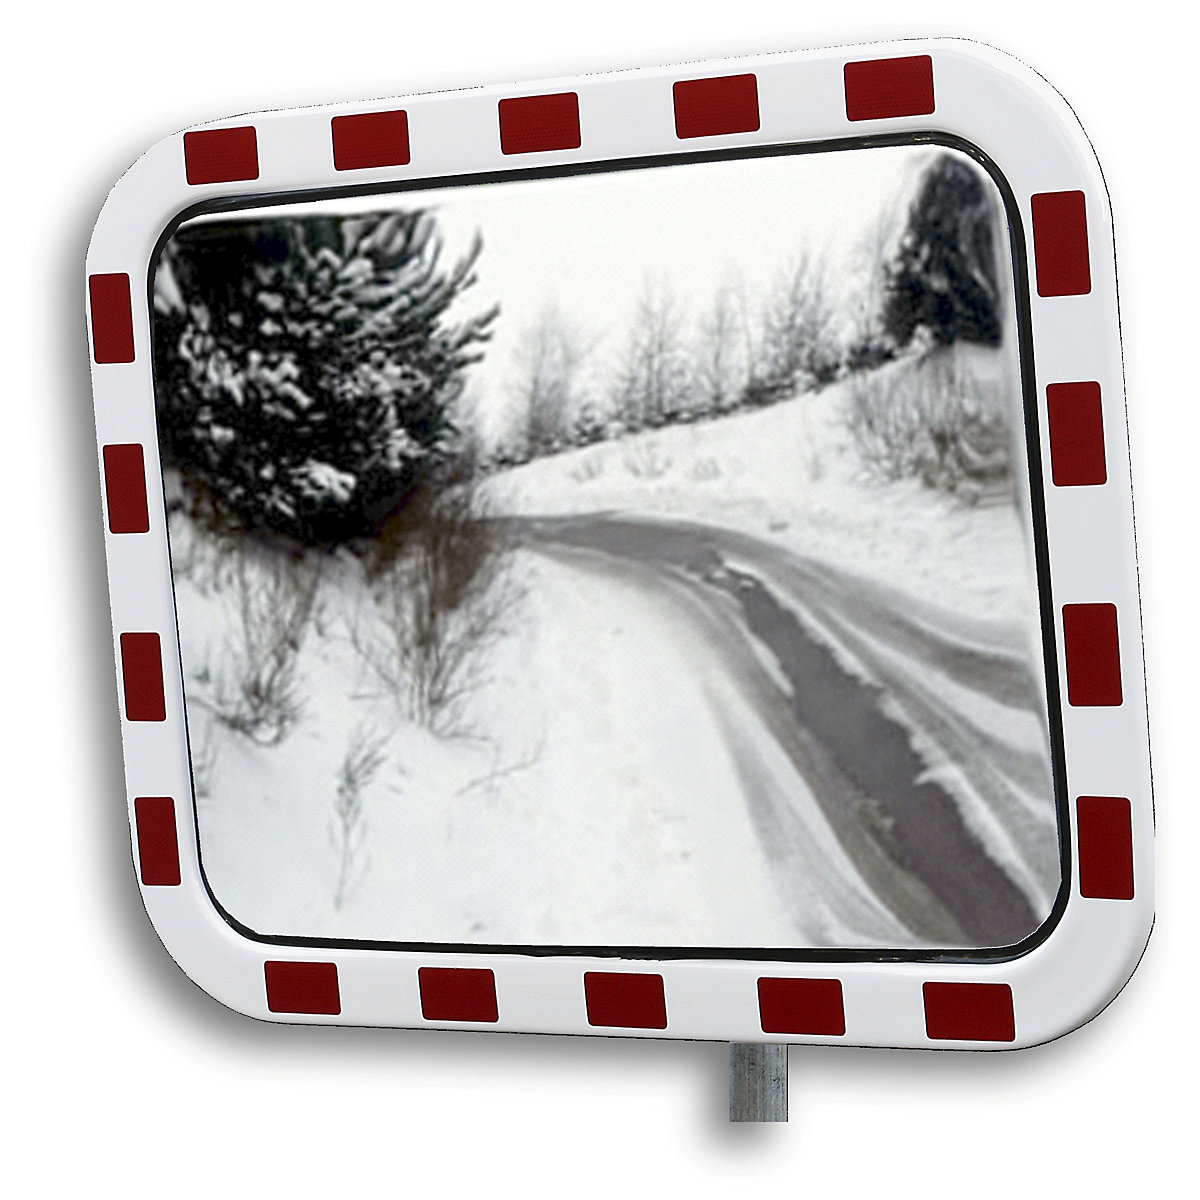 Traffic mirror made of acrylic glass, with an ice-free surface, mirror dimensions W x H 800 x 600 mm-6